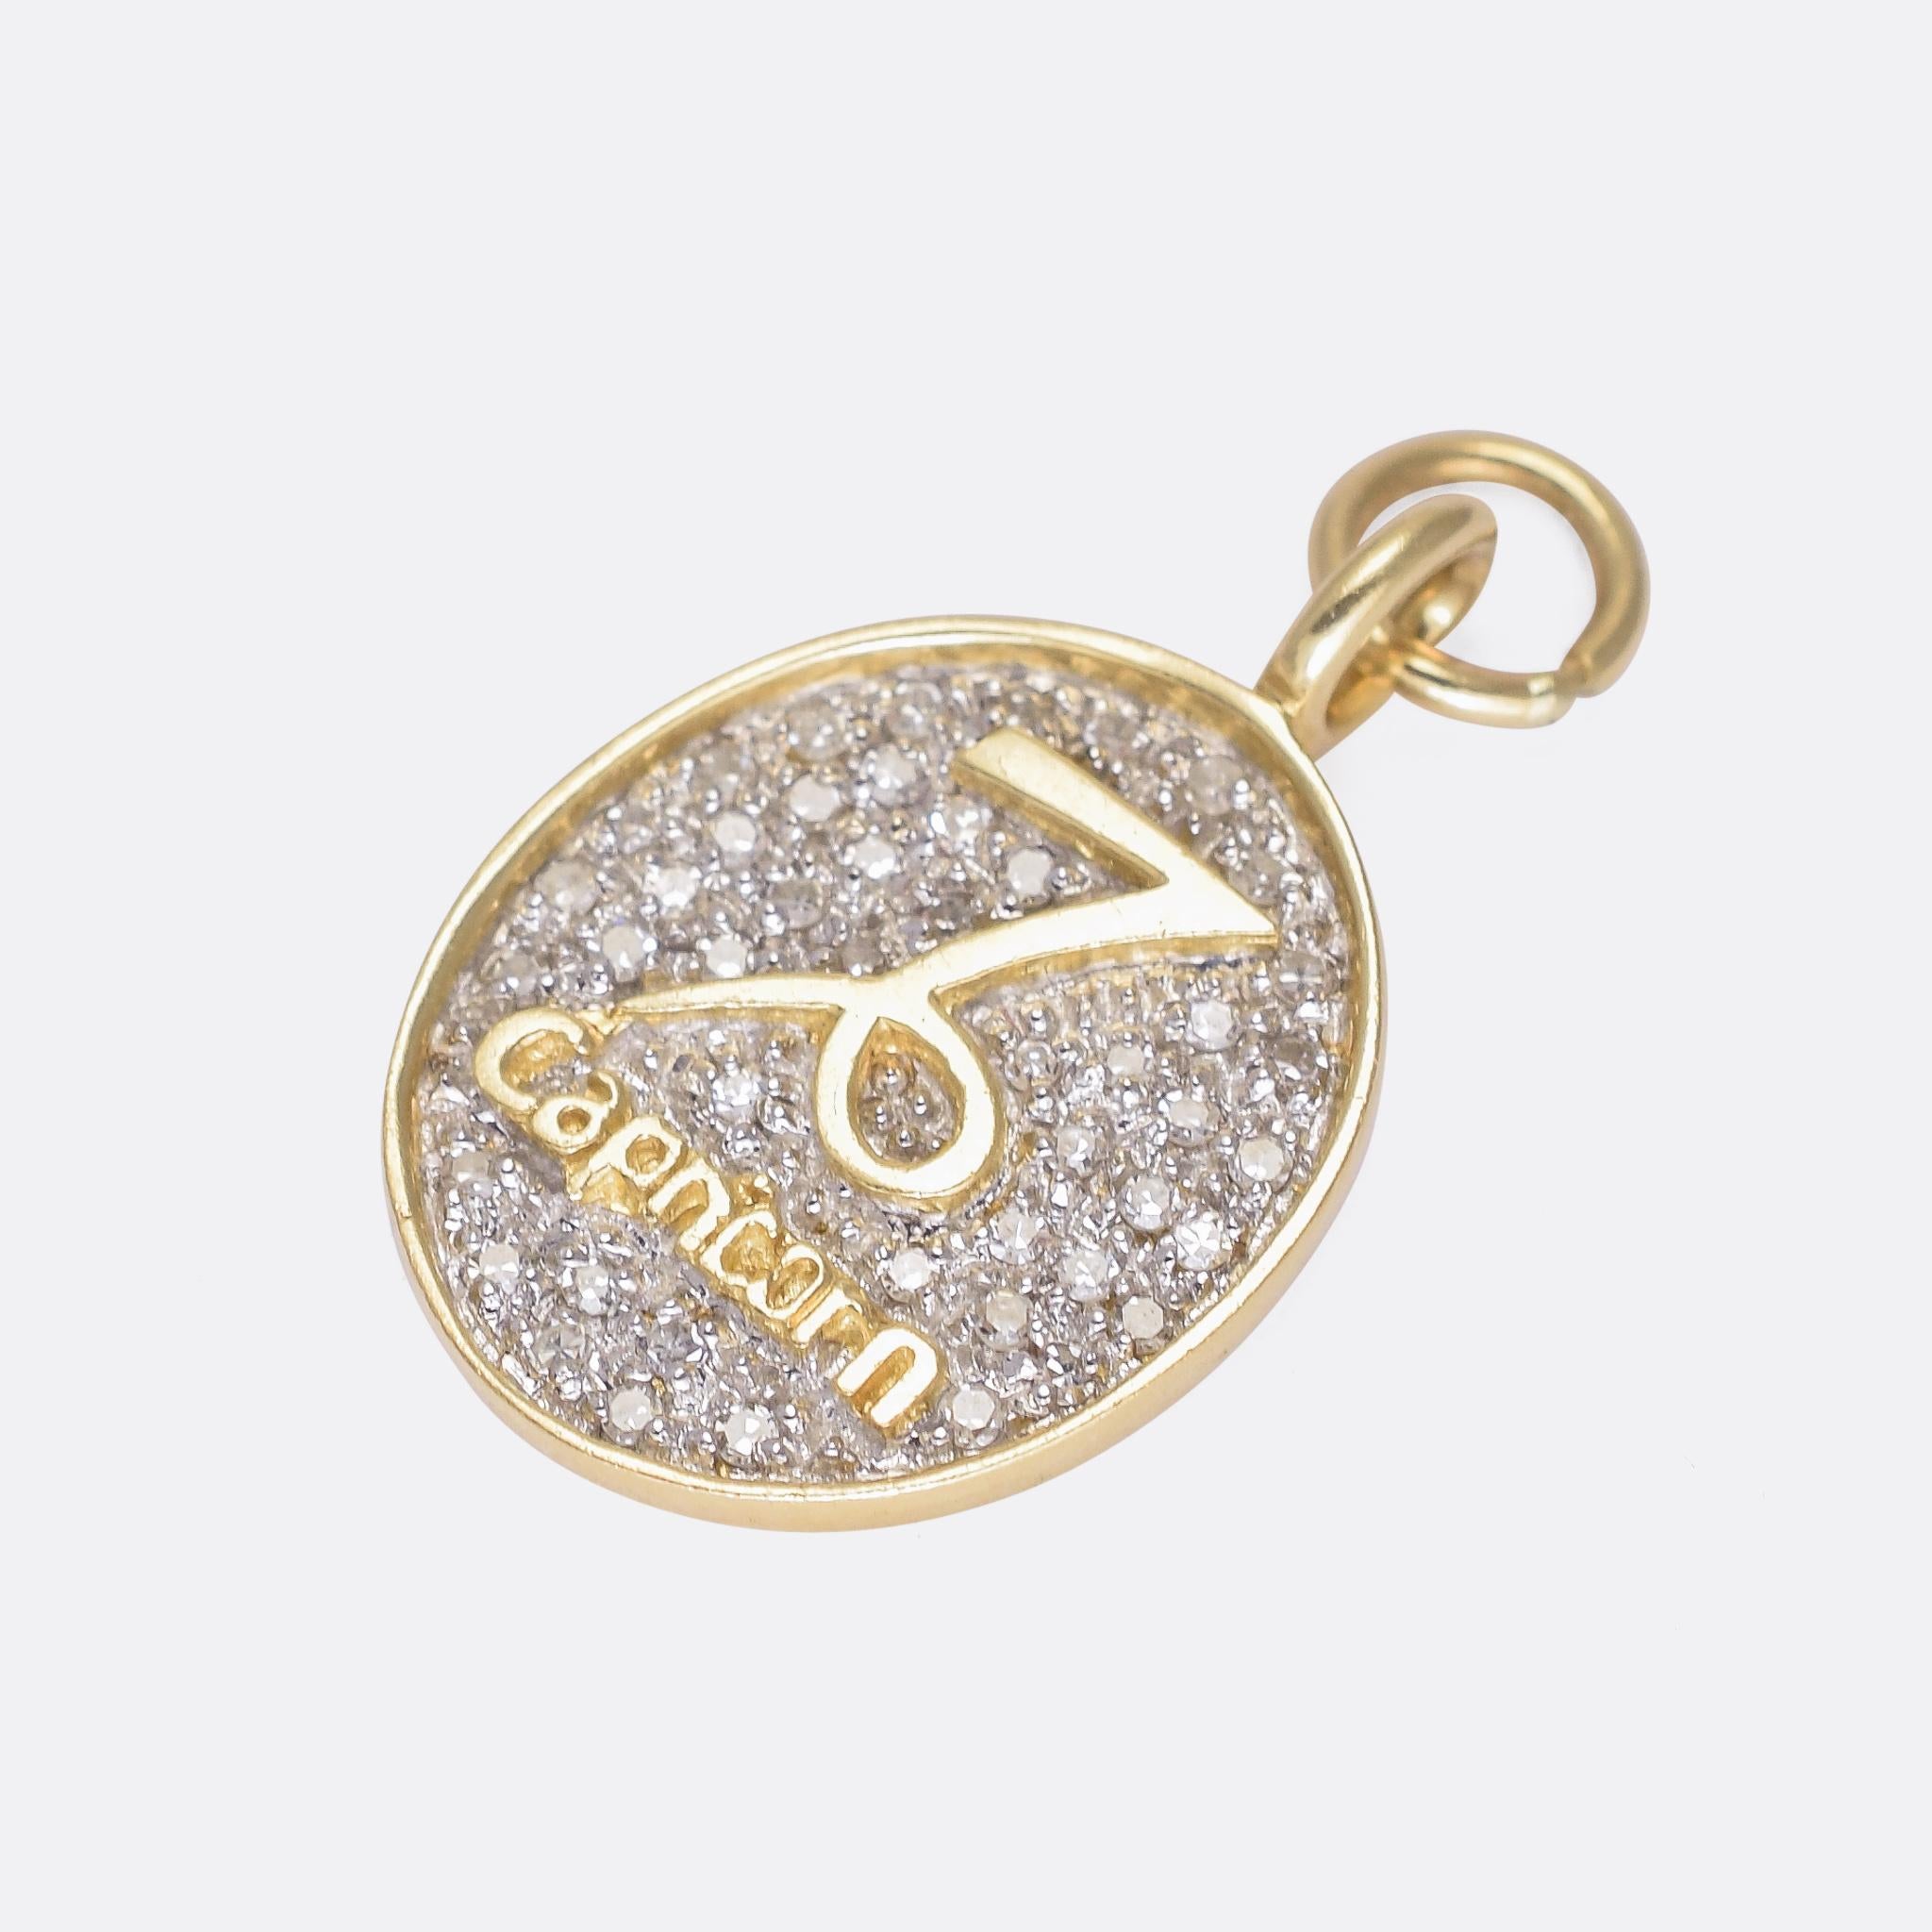 A cool vintage Capricorn pendant dating from the 1960s. It features the Zodiac symbol in gold above the word Capricorn - both in relief against a diamond paved backdrop. It's modelled in 14 karat gold throughout - a good size and very nice